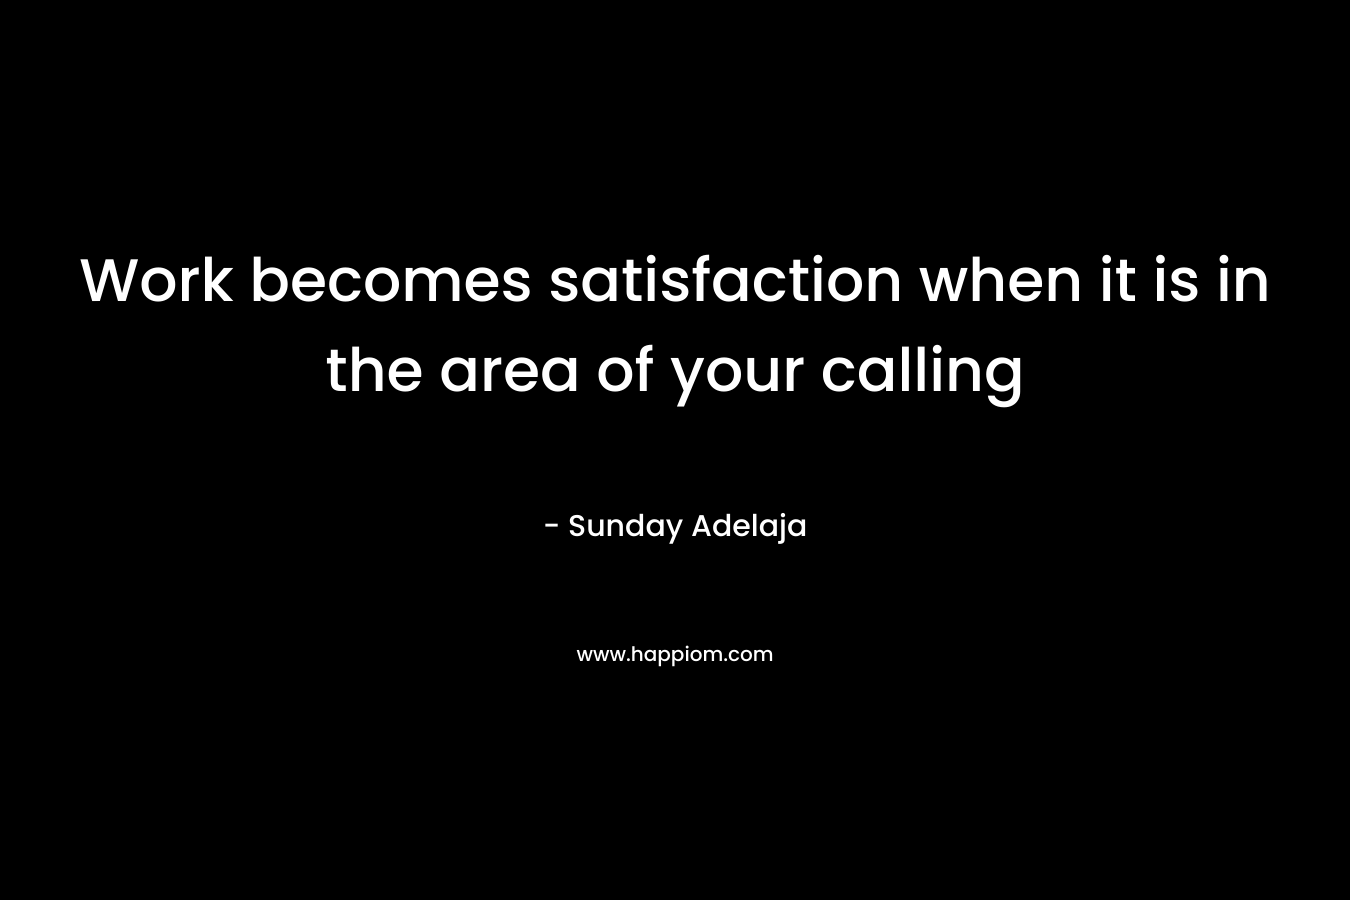 Work becomes satisfaction when it is in the area of your calling